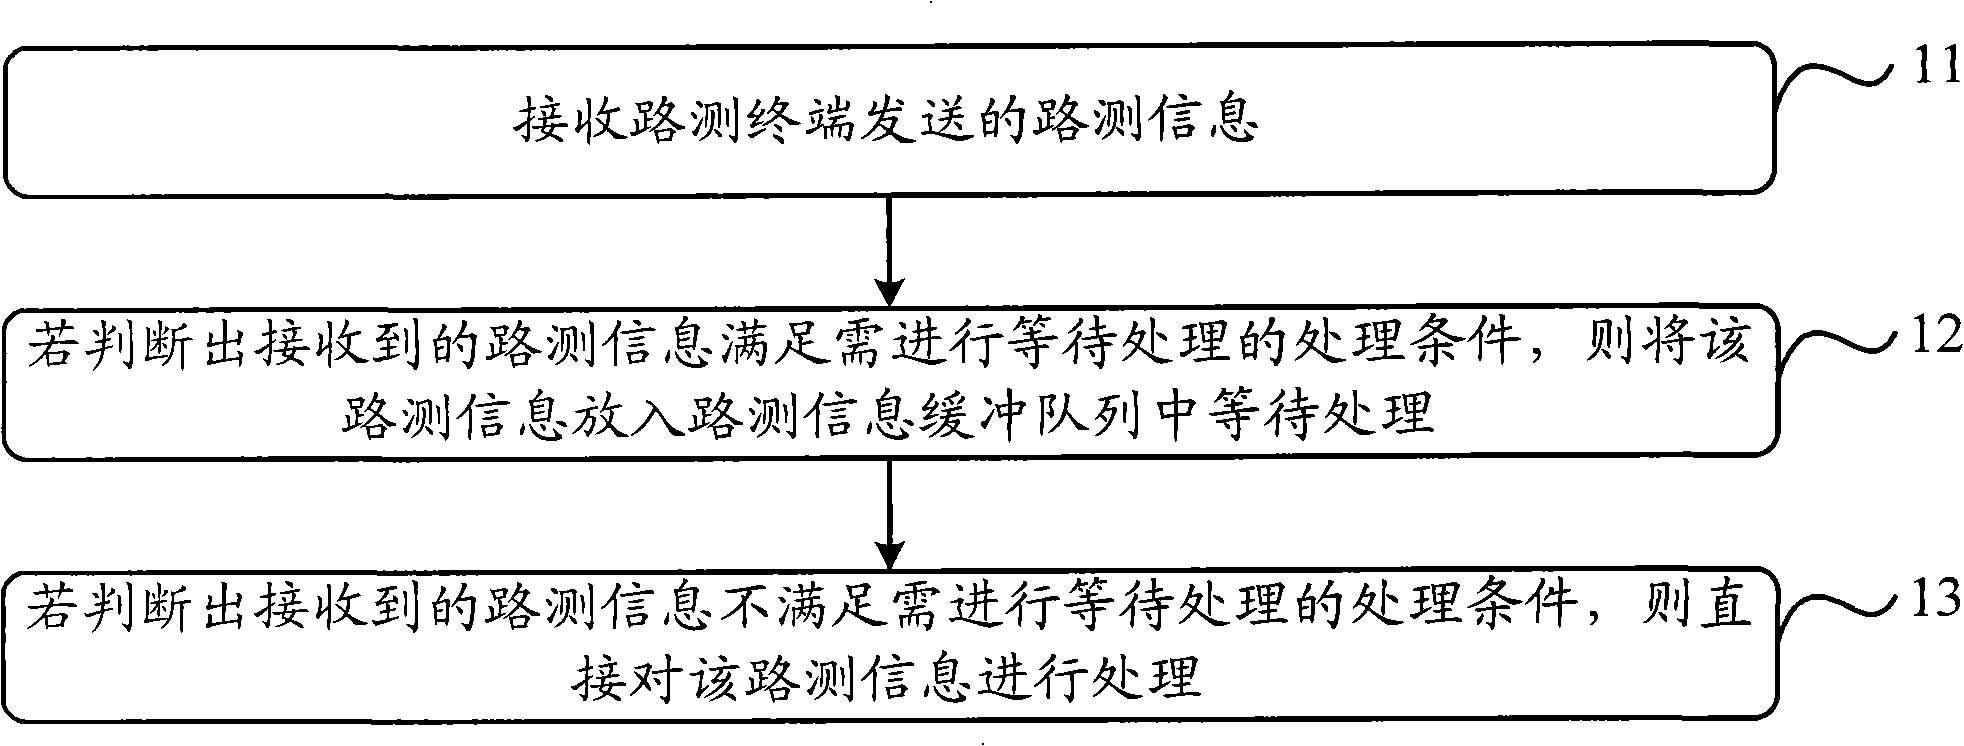 Road test information processing method and device